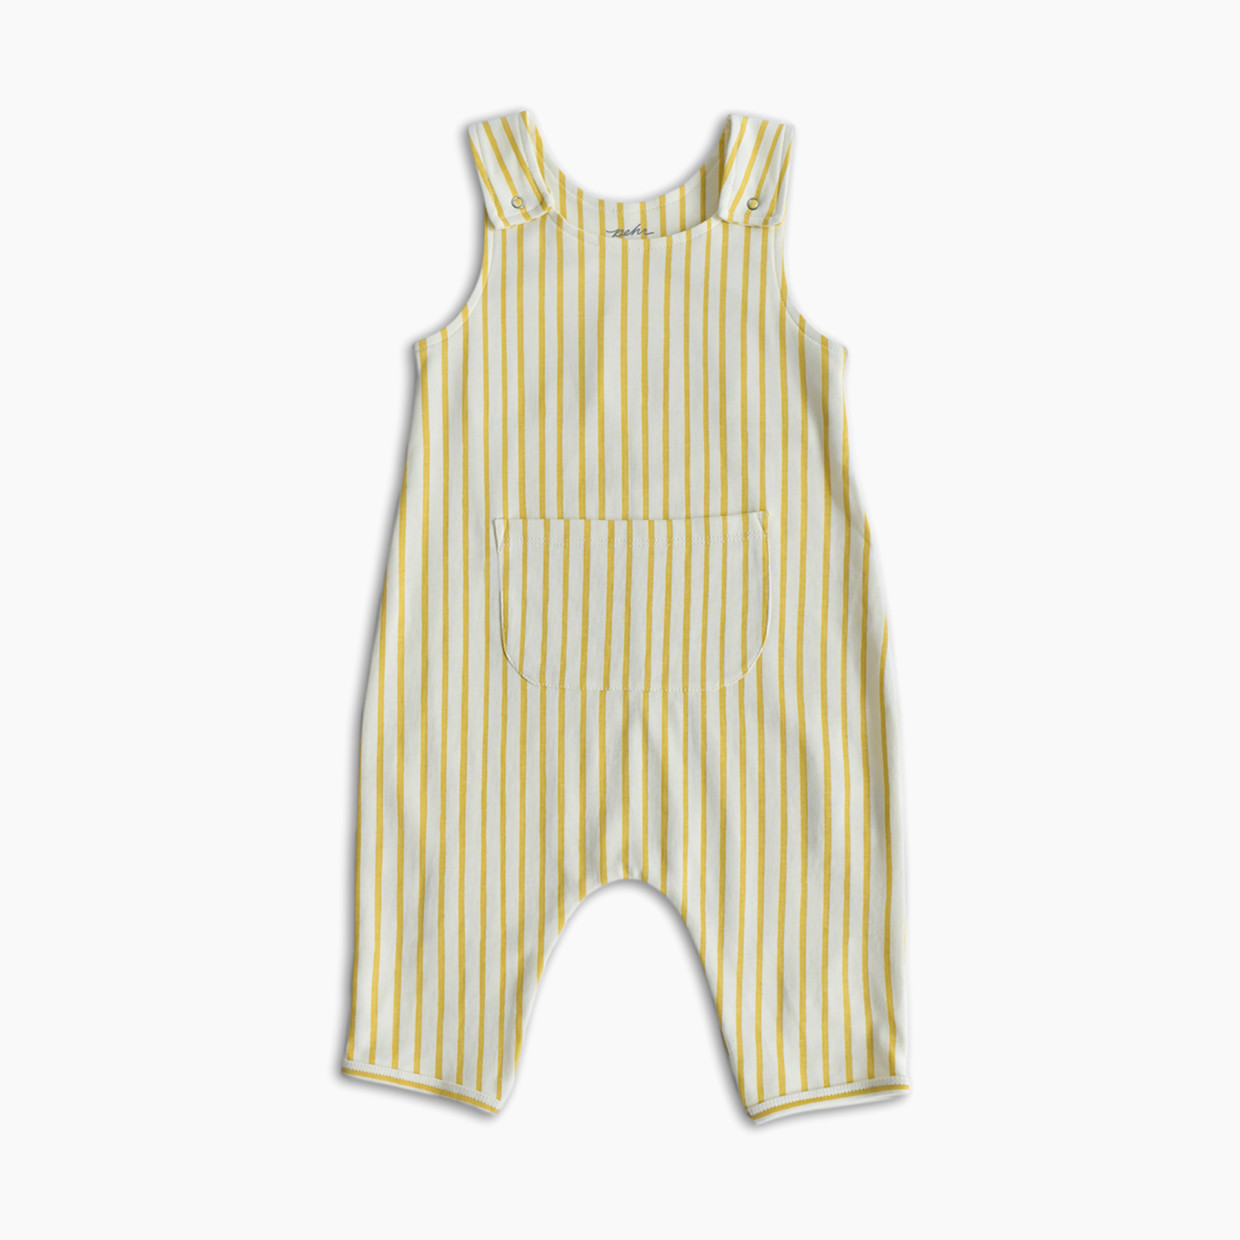 Pehr Stripes Away Overall - Stripes Away Marigold, 3-6 M.